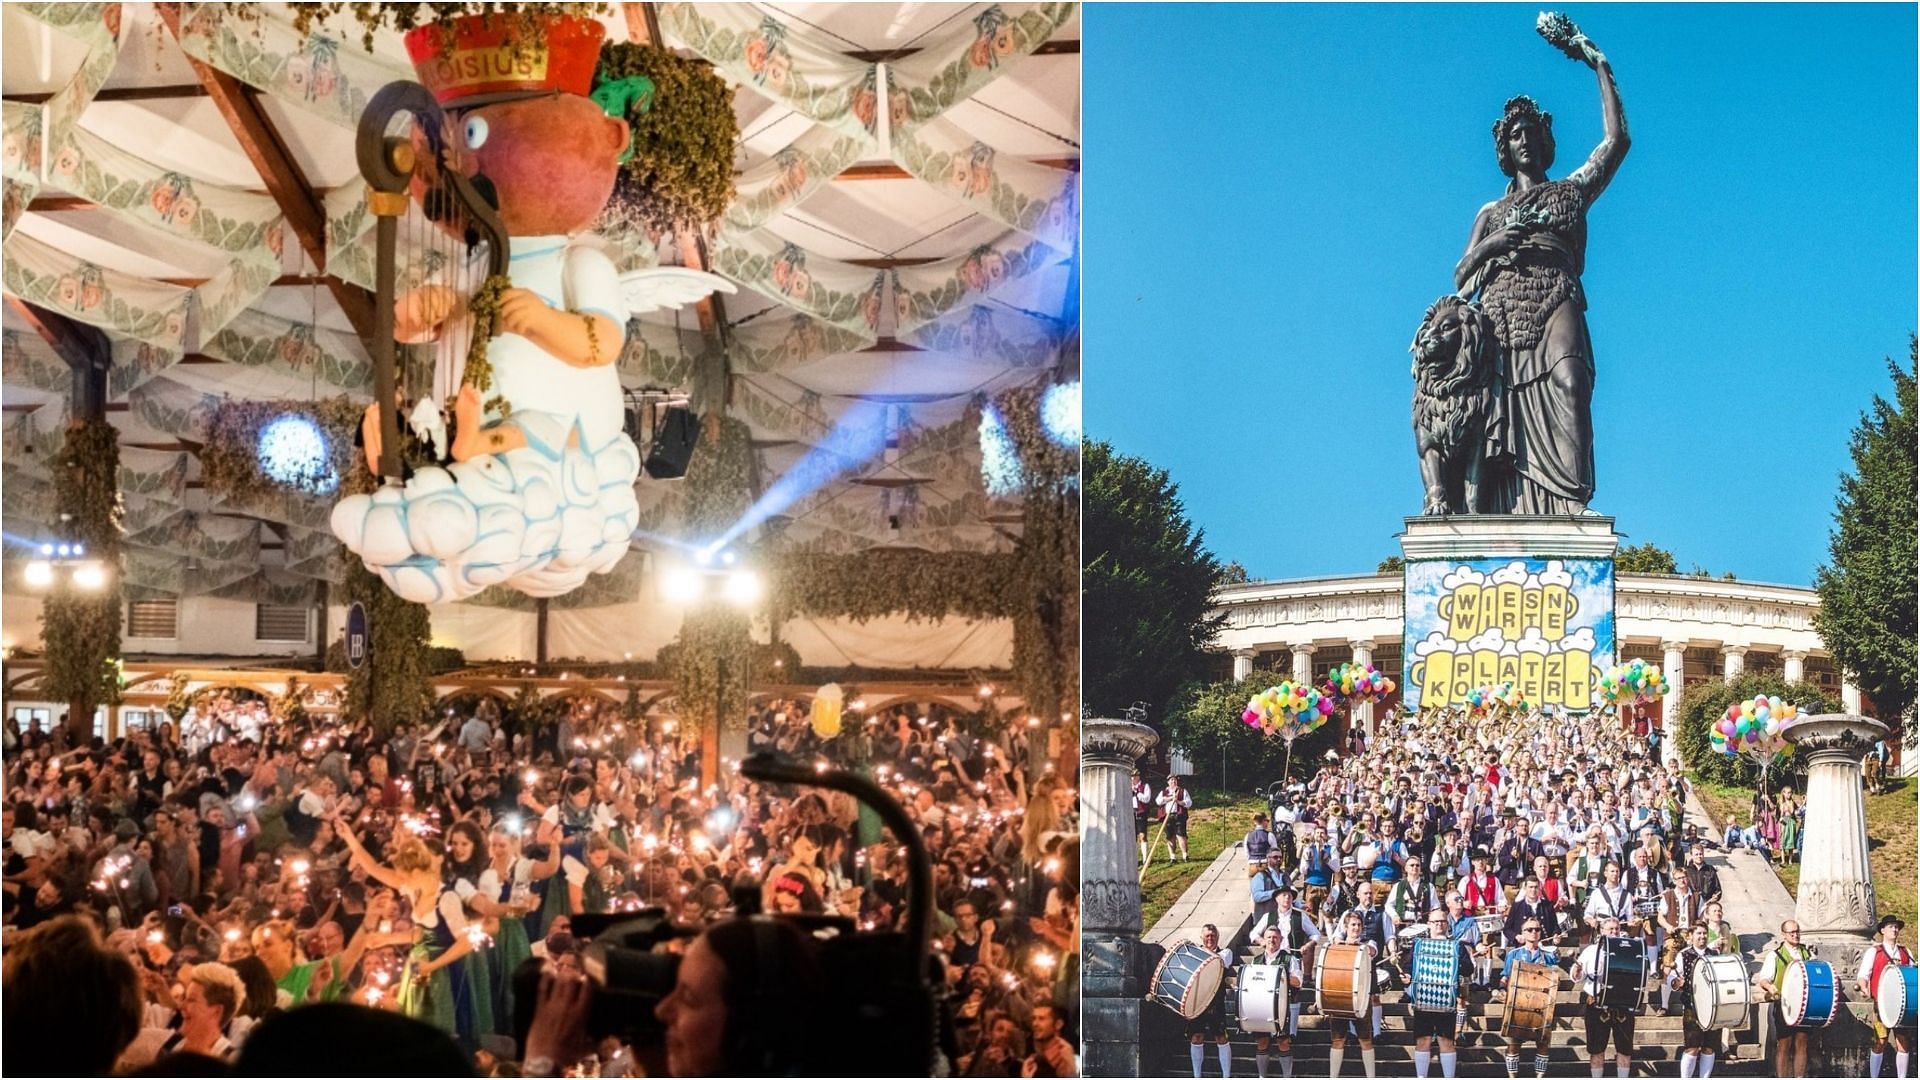 Oktoberfest is slated from September 17 to October 3 this year (Images via Instagram/@octoberfest)